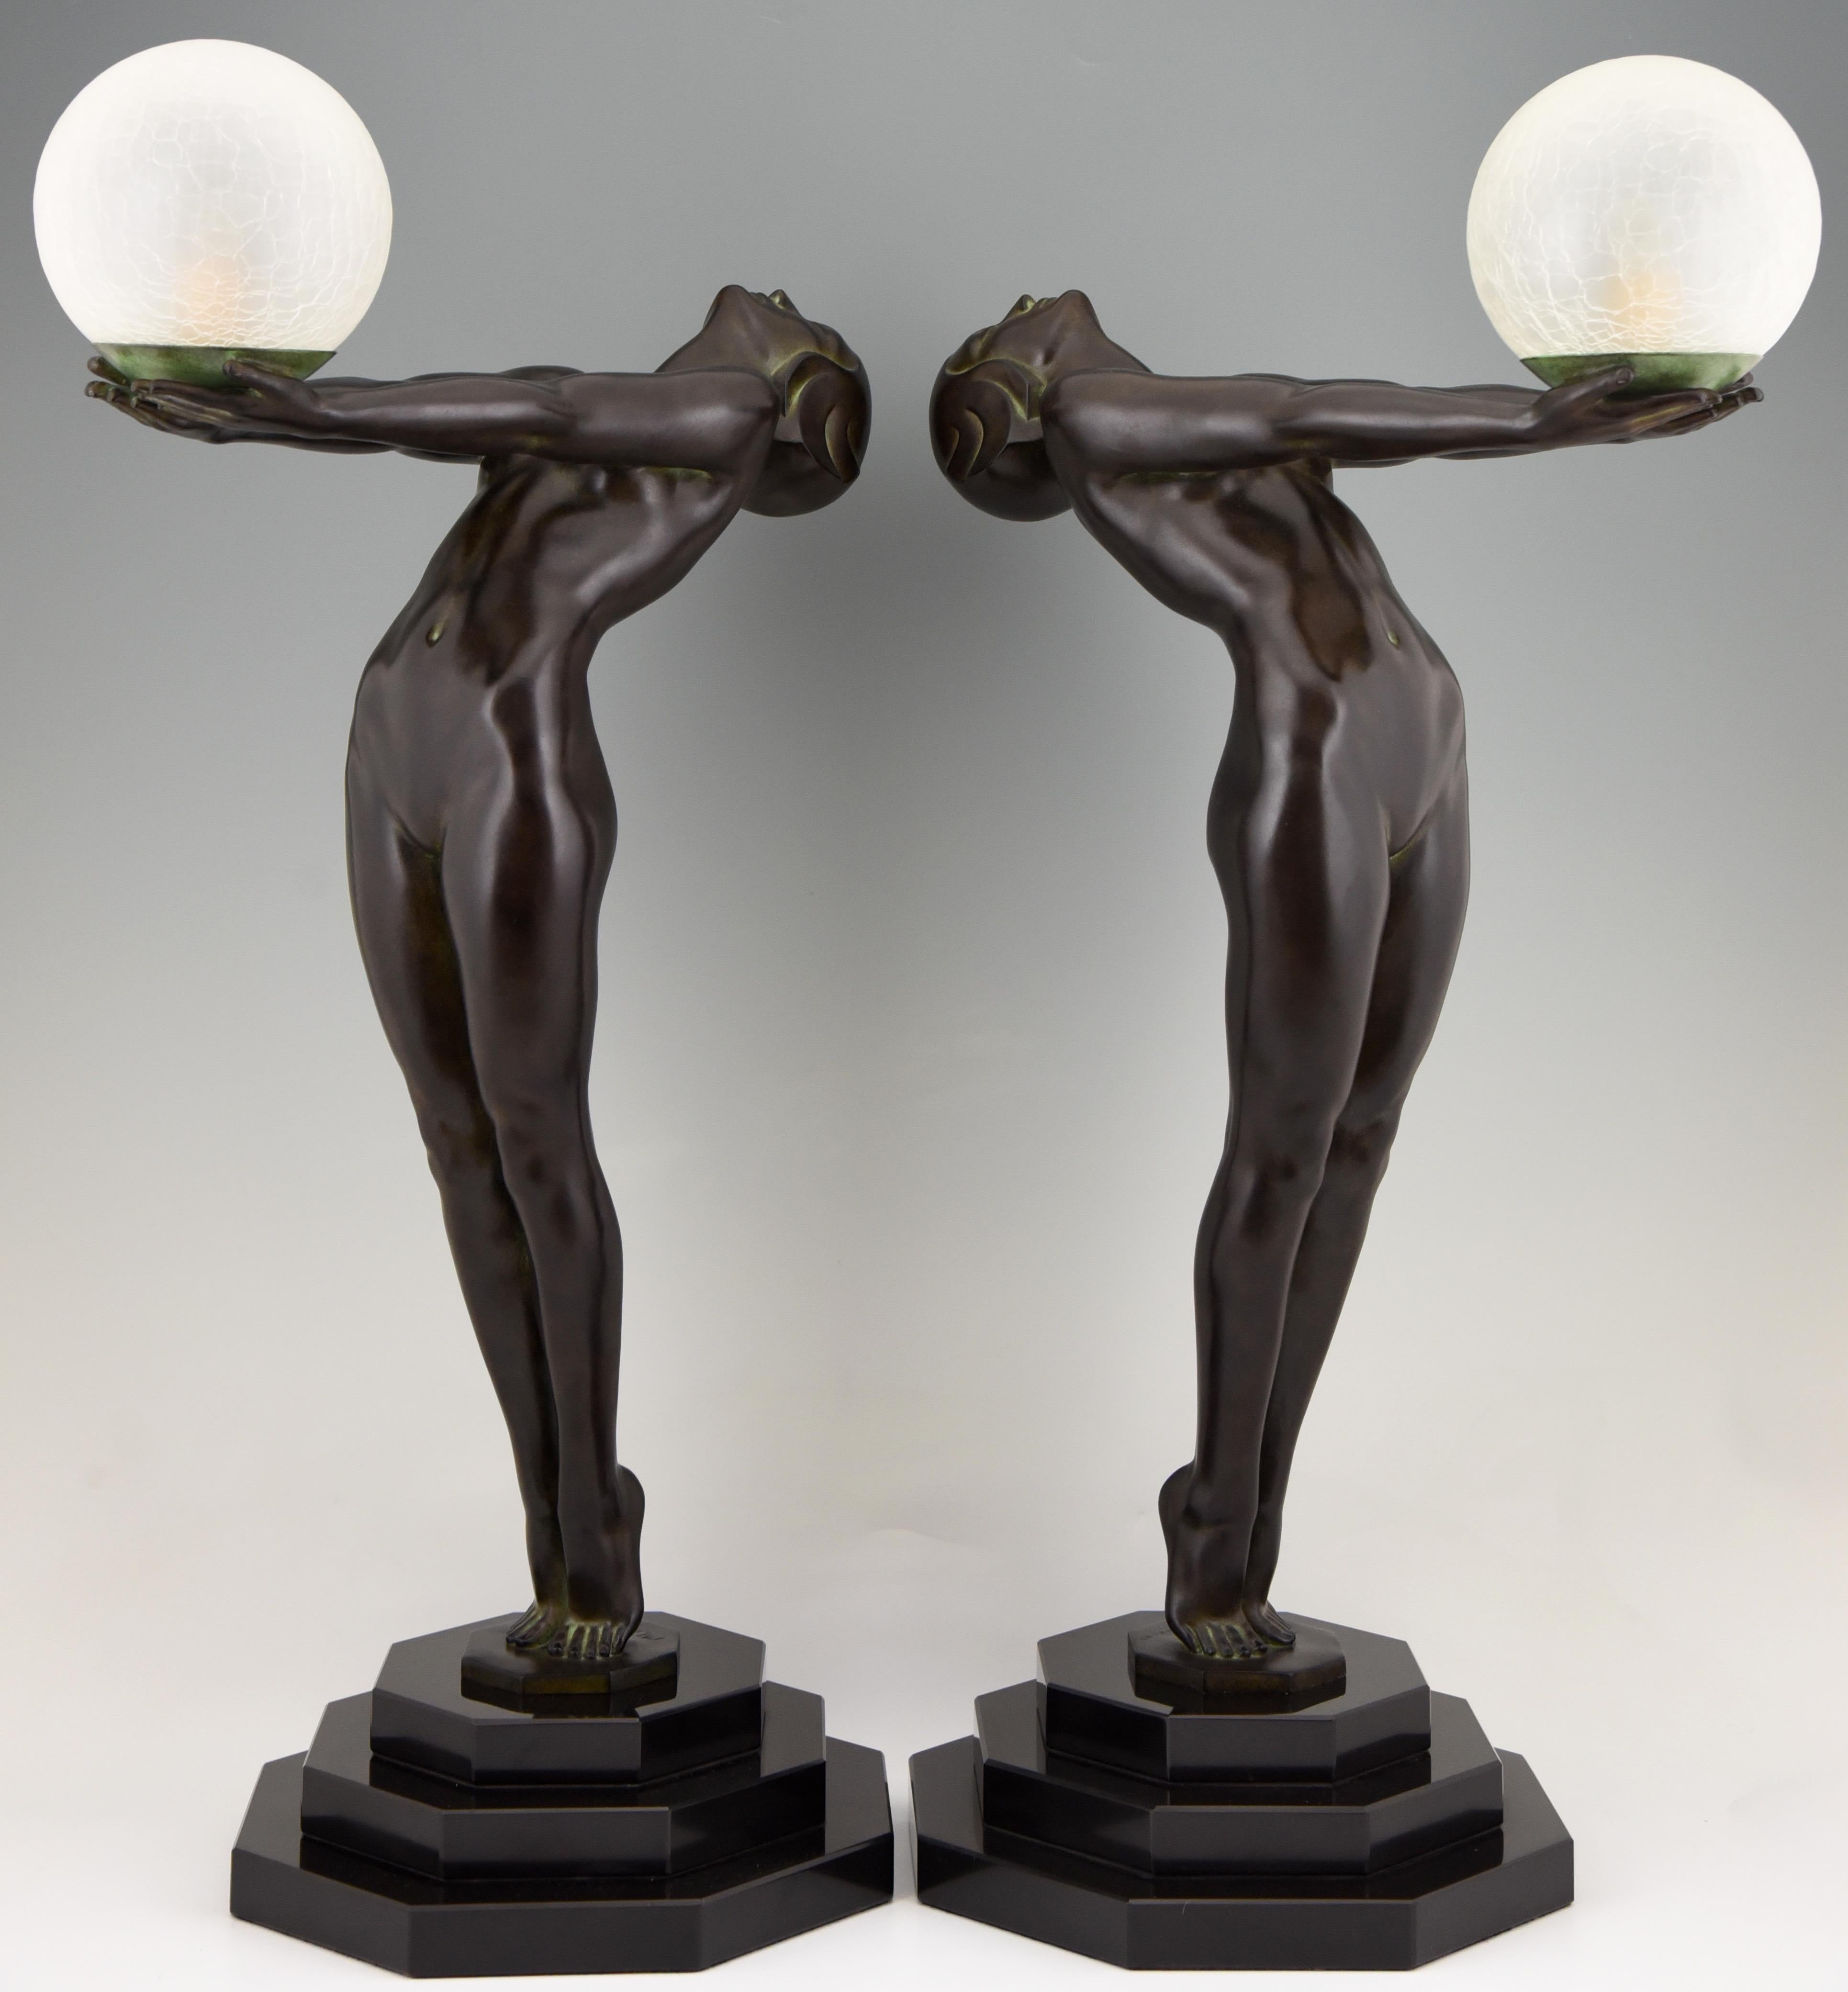 Clarte, iconic 84 cm / 33 inch tall Art Deco style figural table lamp of a standing nude holding a glass shade by Max Le Verrier with foundry mark.
Designed in 1928.
Posthumous contemporary cast at the Max Le Verrier foundry in Paris.

Smaller sizes